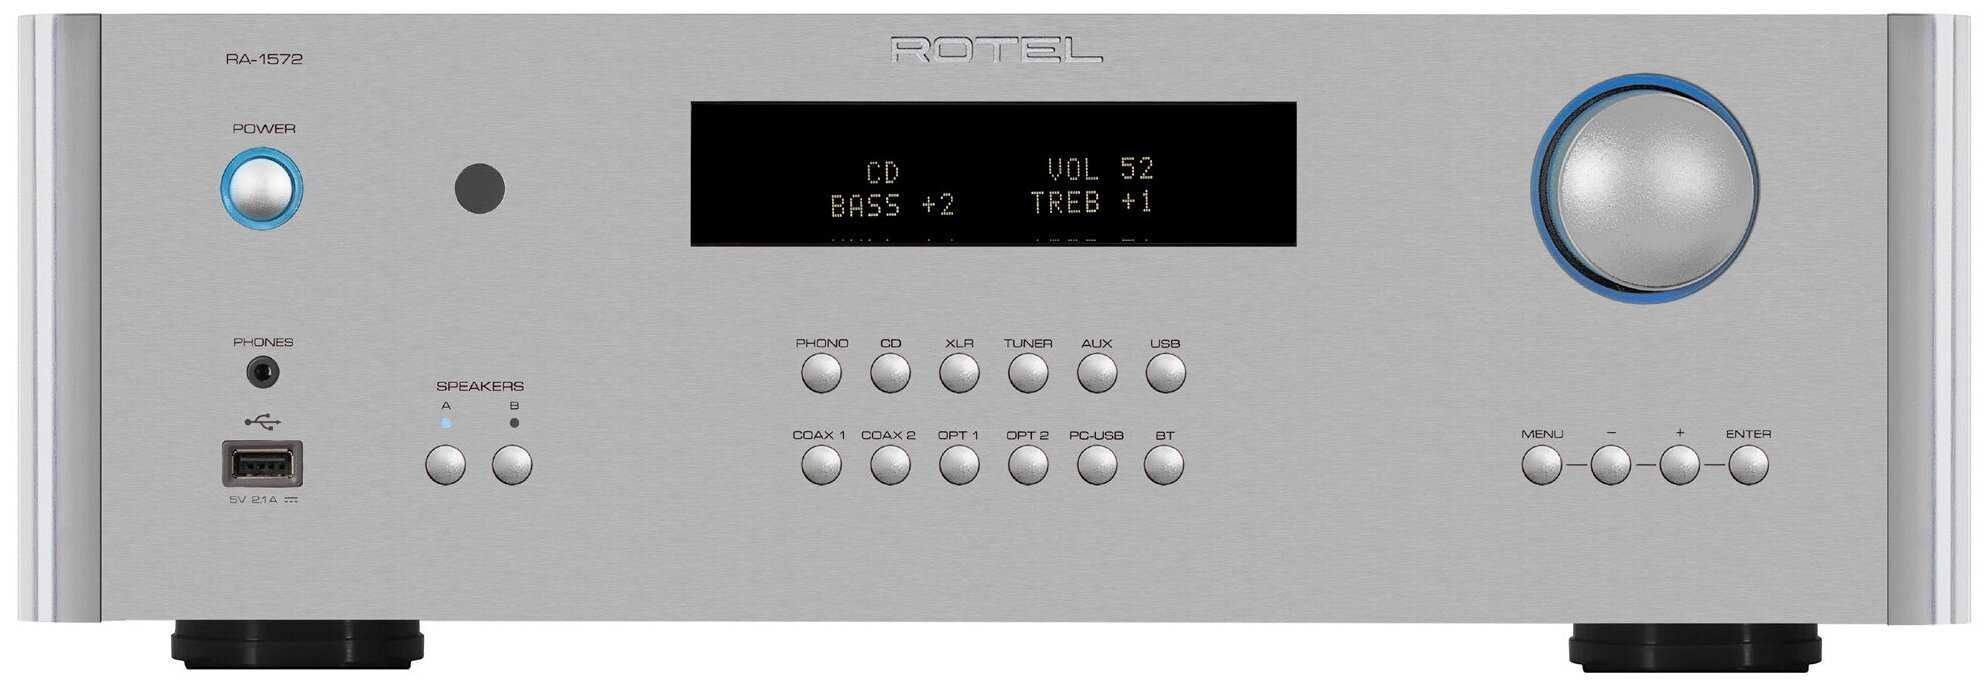 Rotel rc-1590mkii pre-amp review